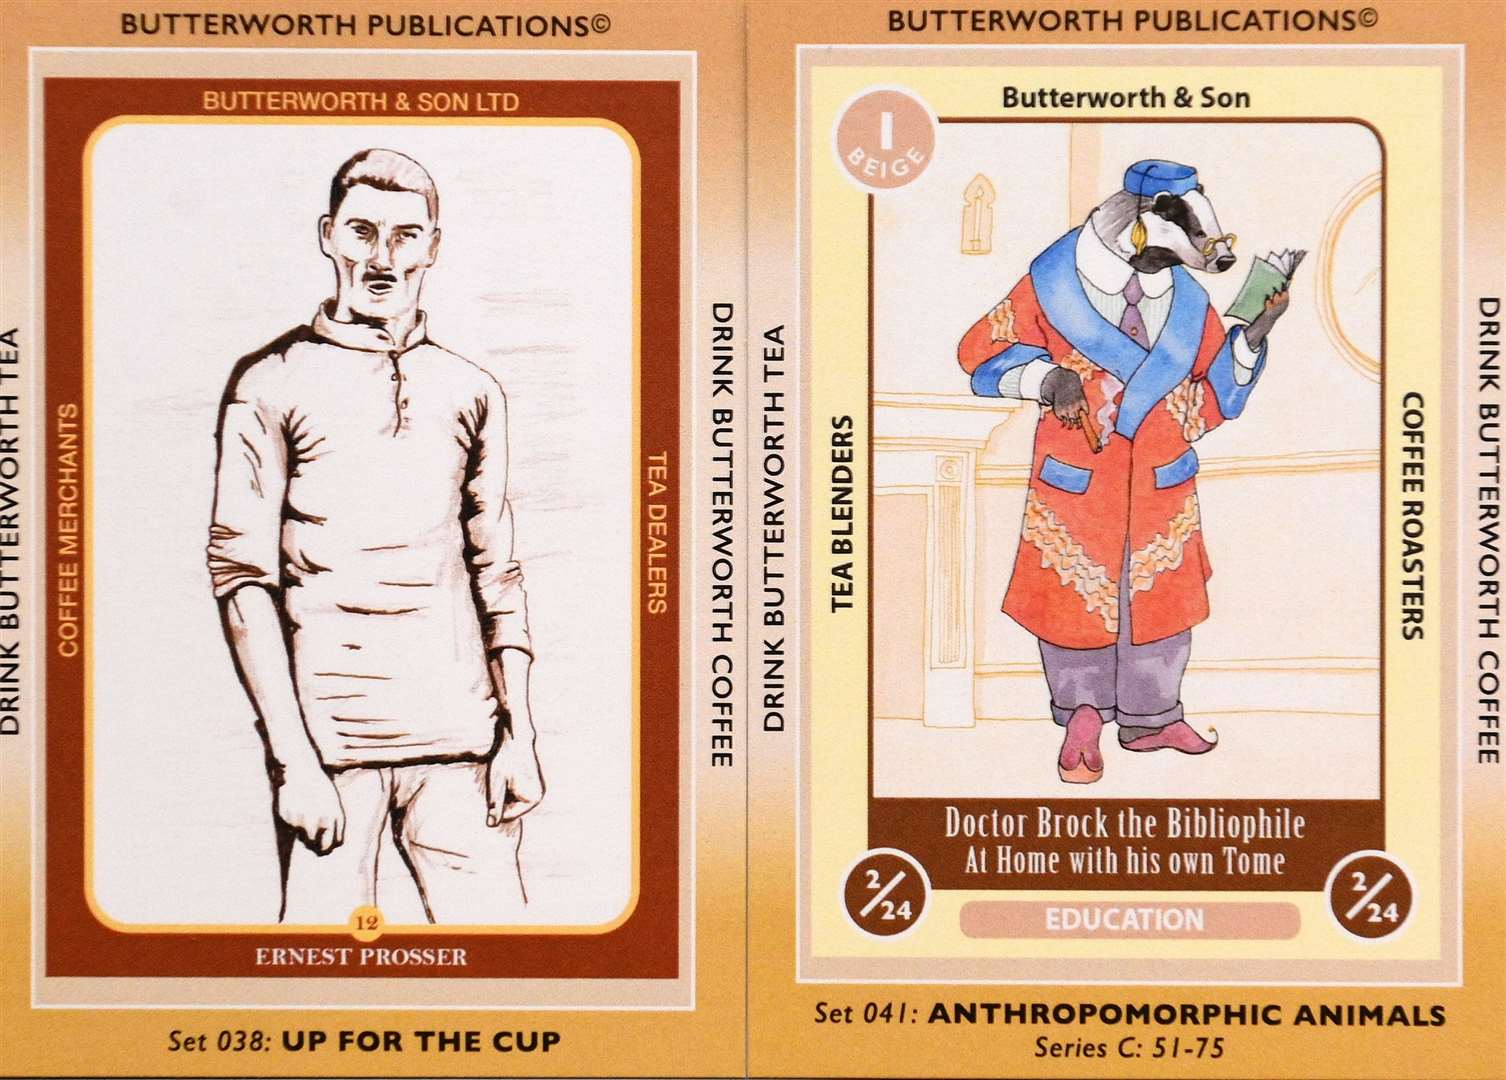 Up For The Cup is one from a set of storytelling cards while Anthropomorphic Animals was educational